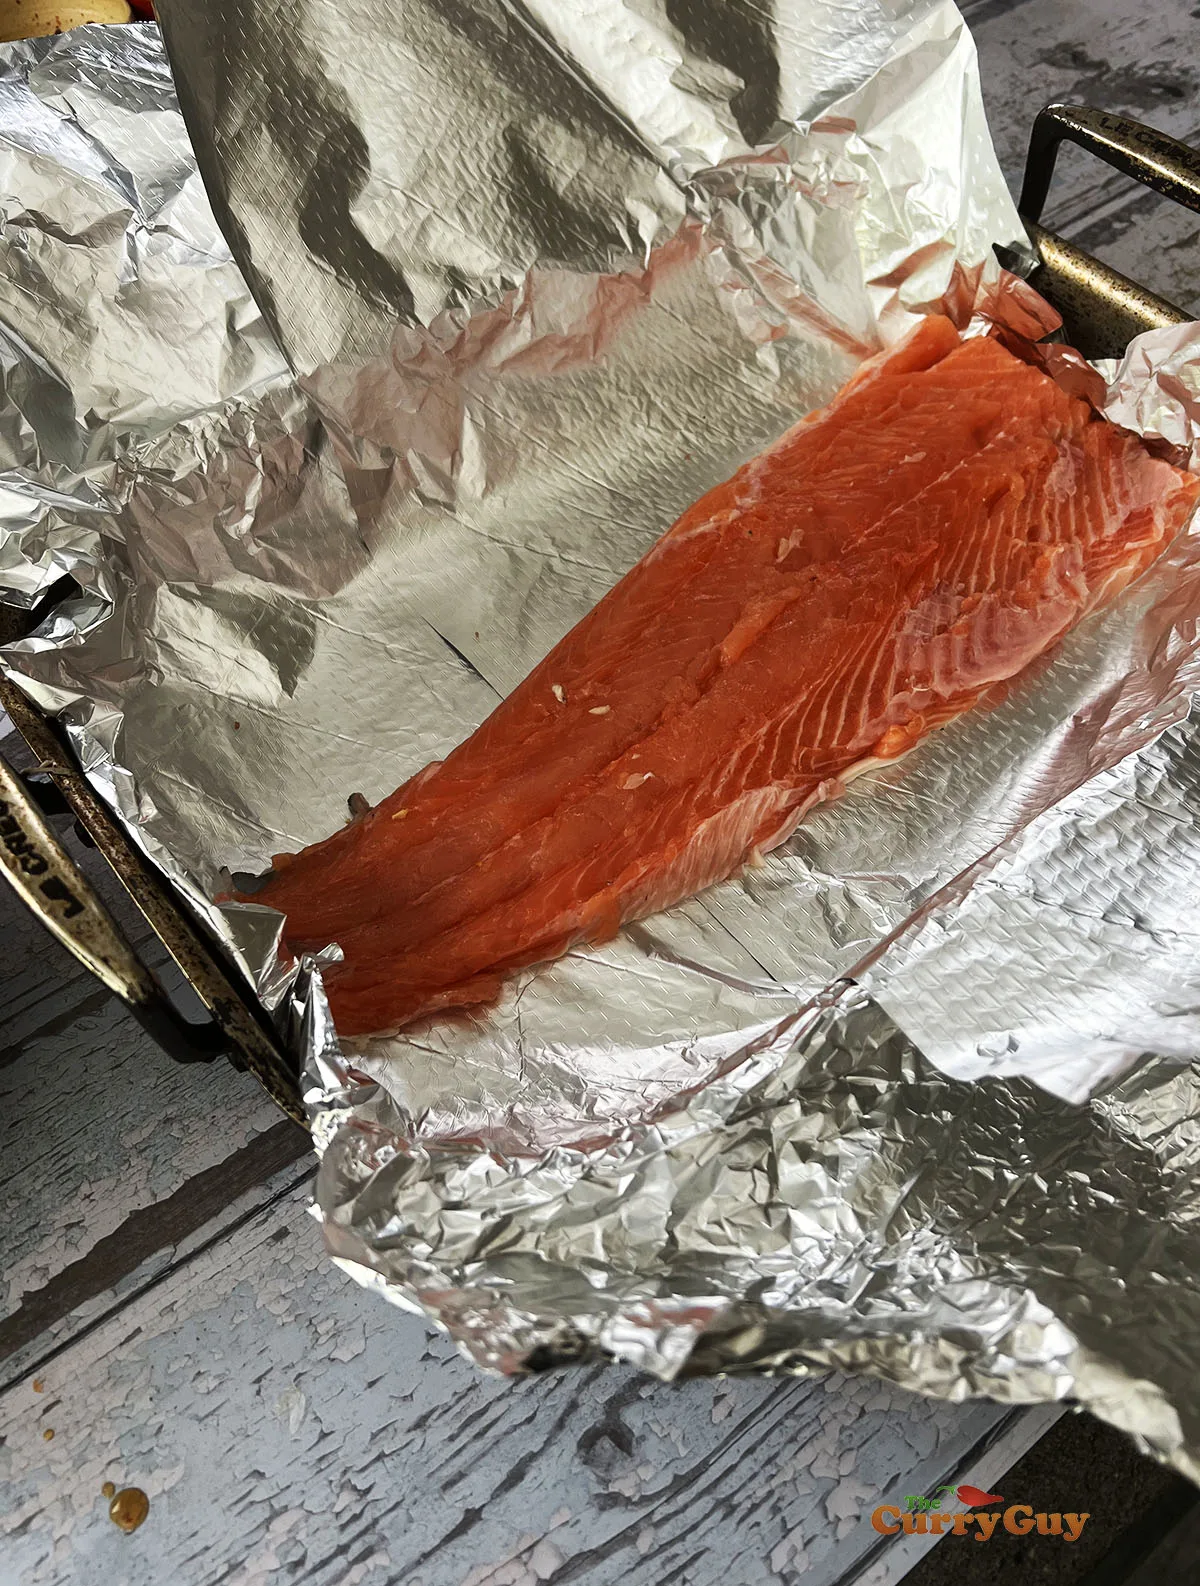 Salmon on foil, ready for baking